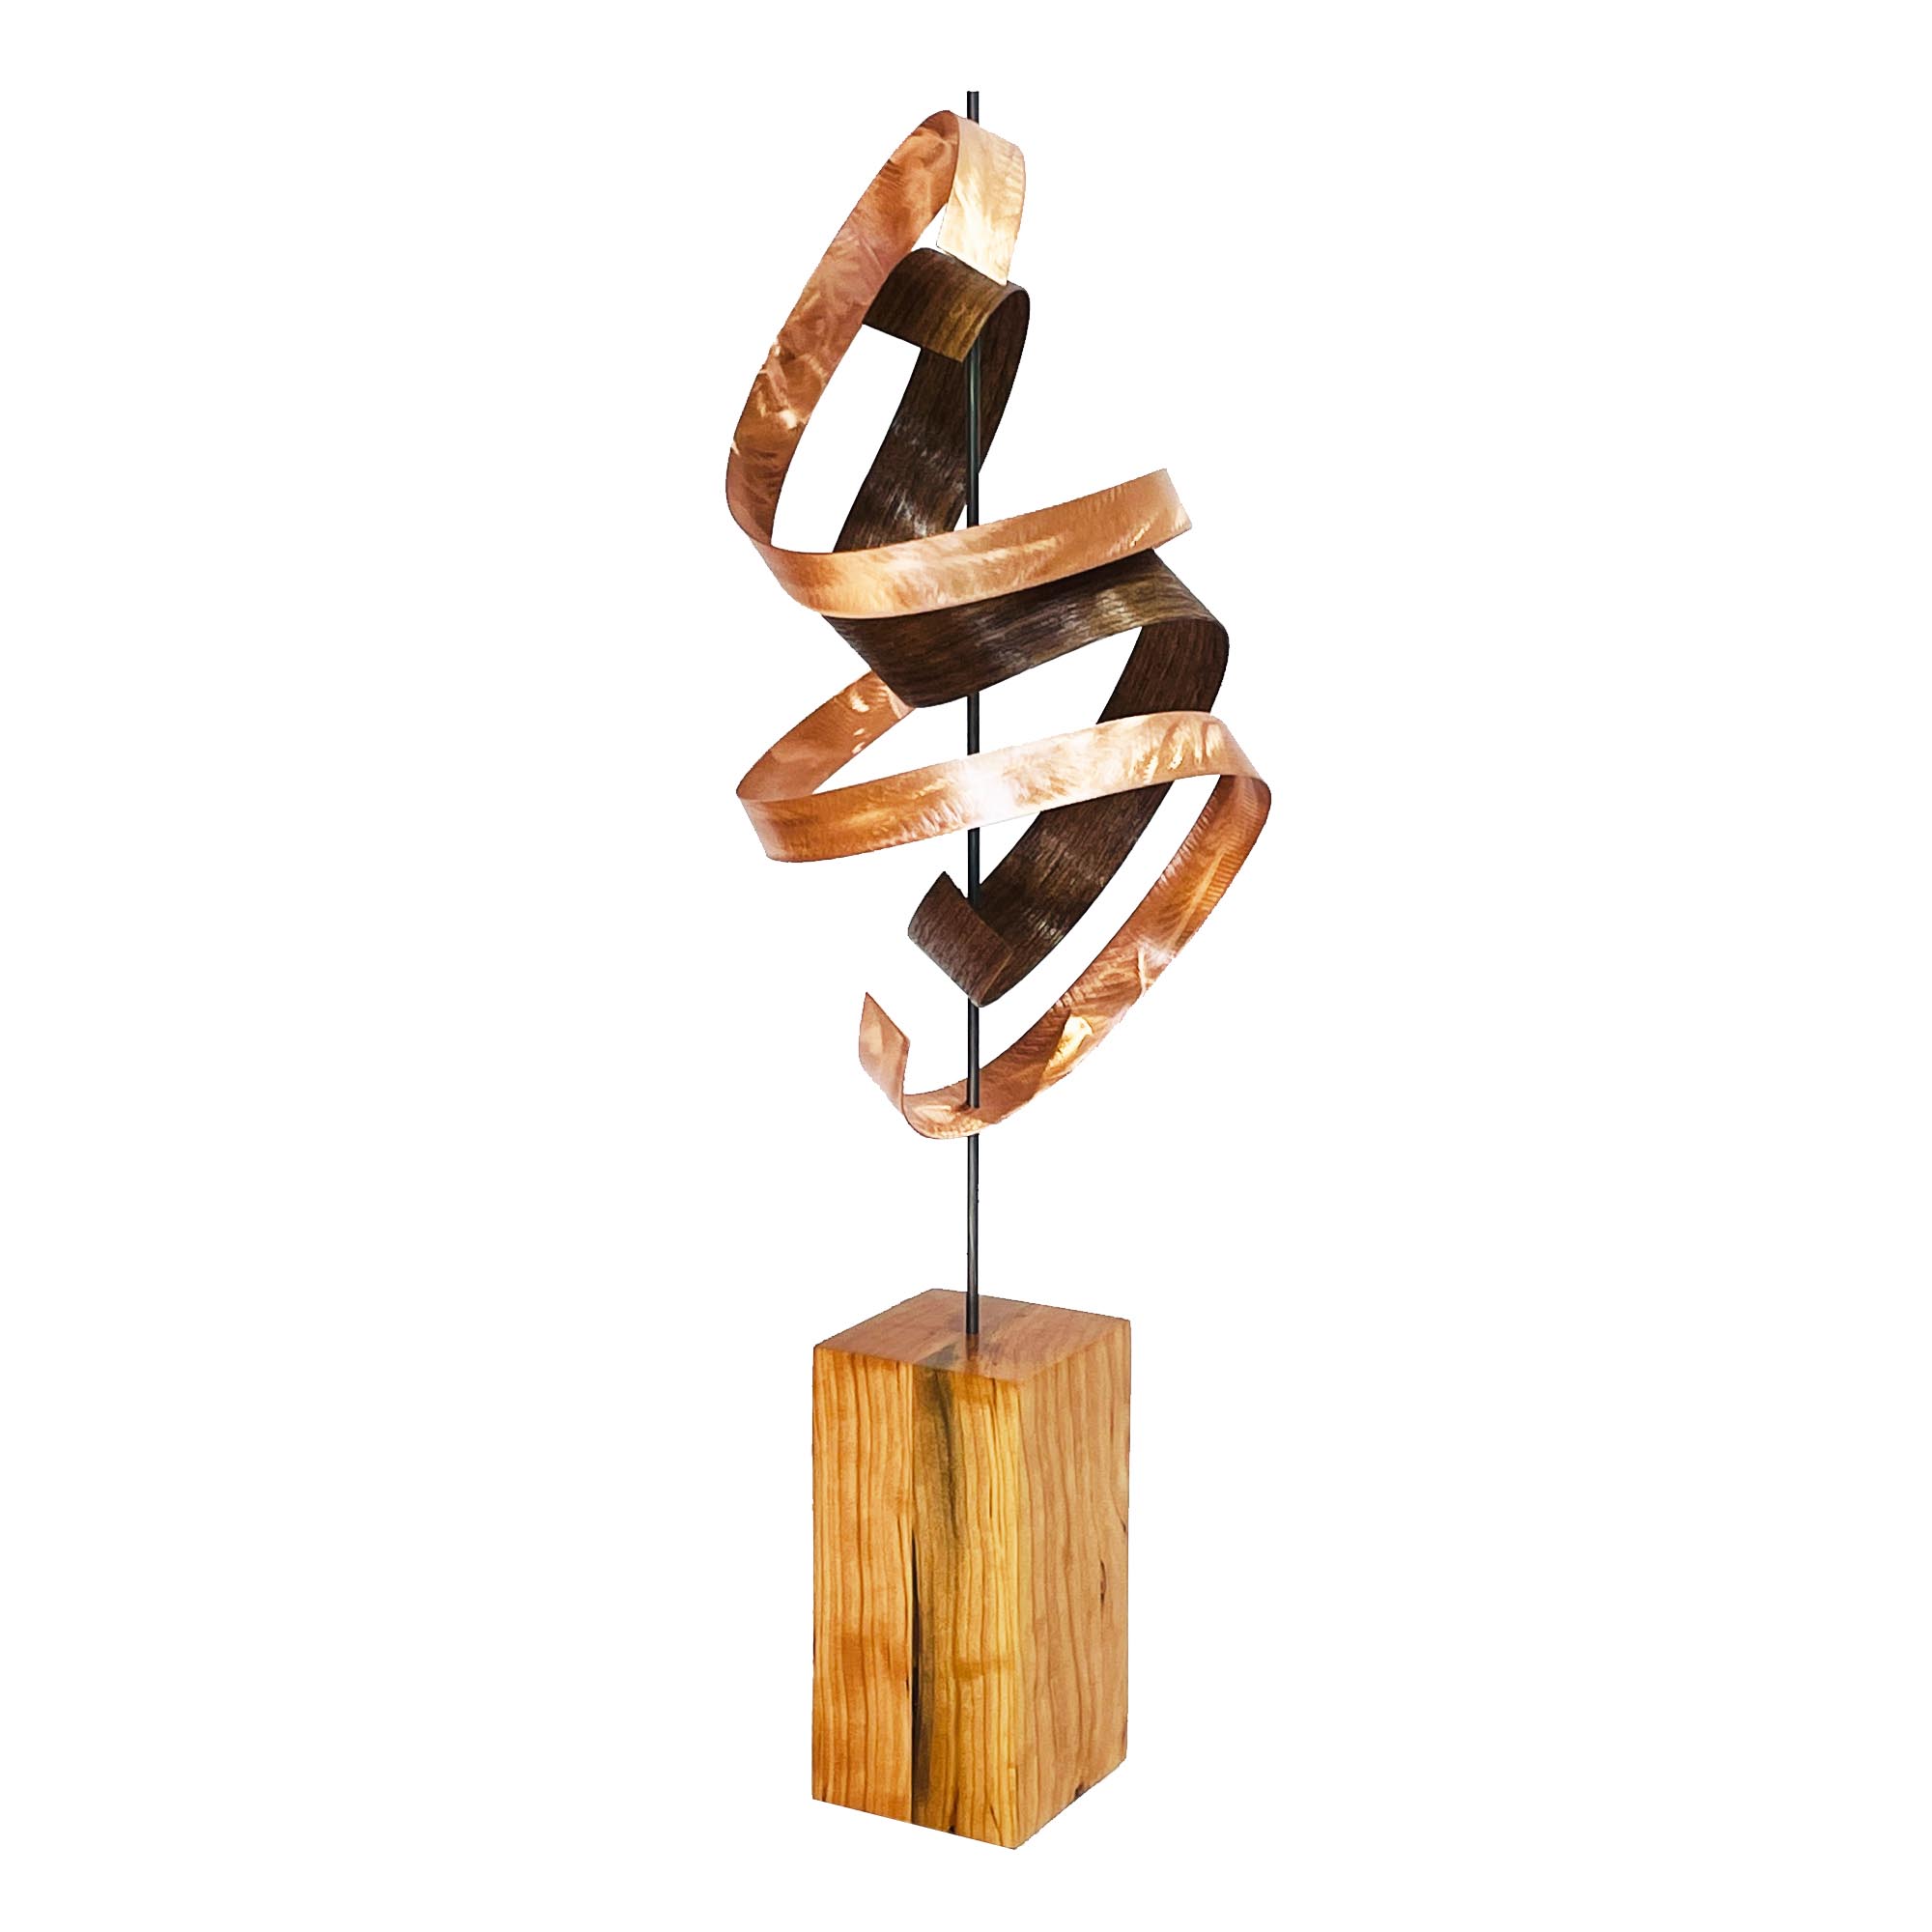 Waltz v2 Copper Cherry by Jackson Wright - Abstract Wood Sculpture, Kinetic Sculpture - Image 3